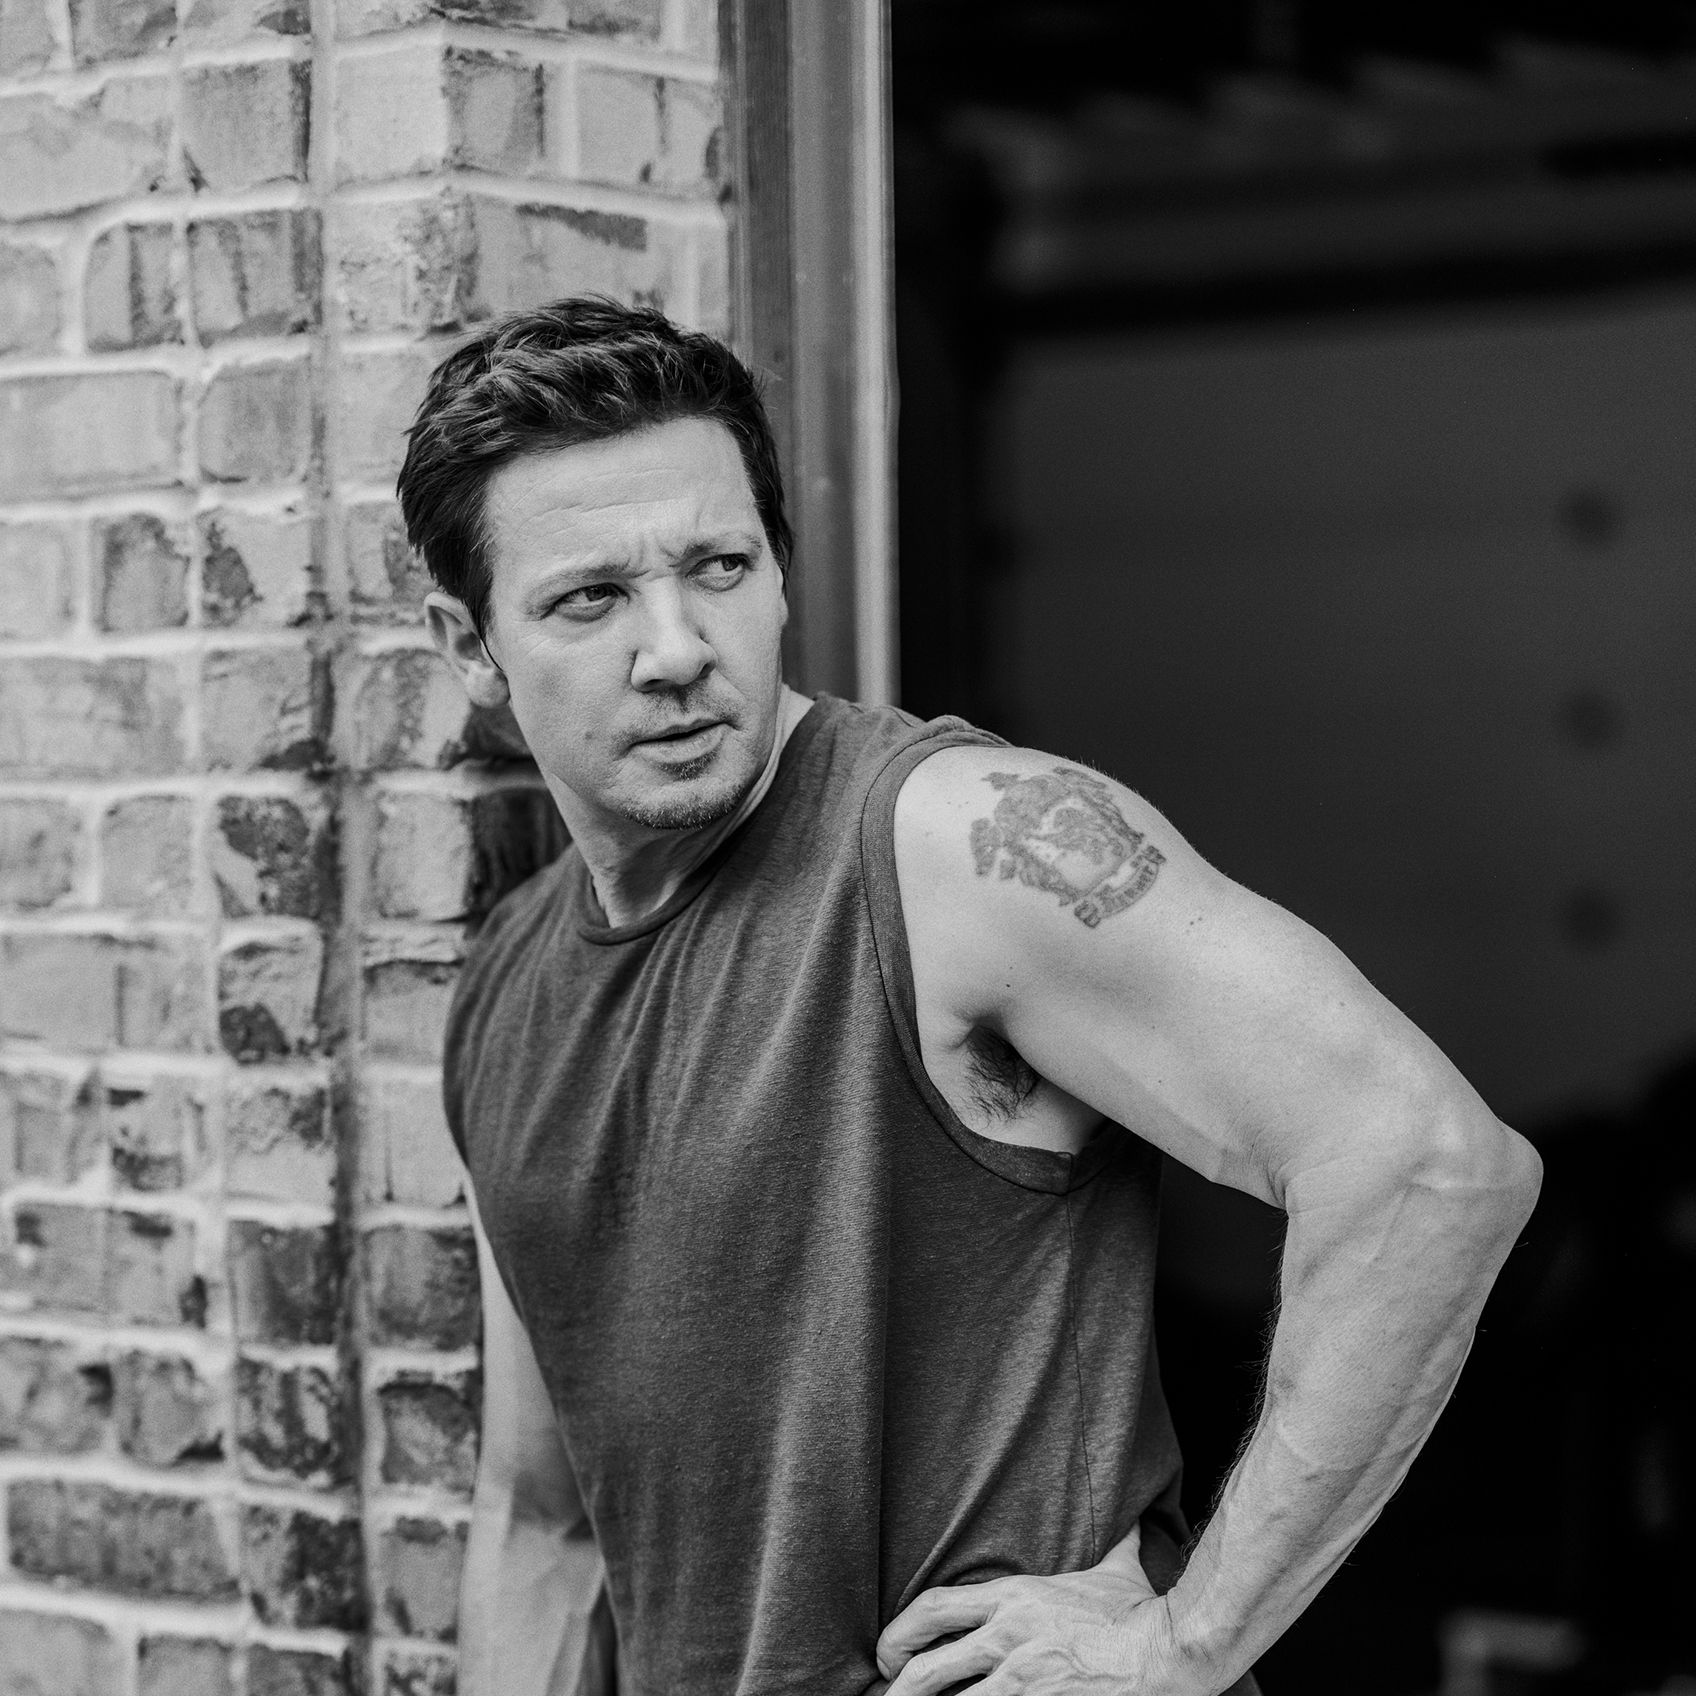 Jeremy Renner Is Our July/August Cover Star